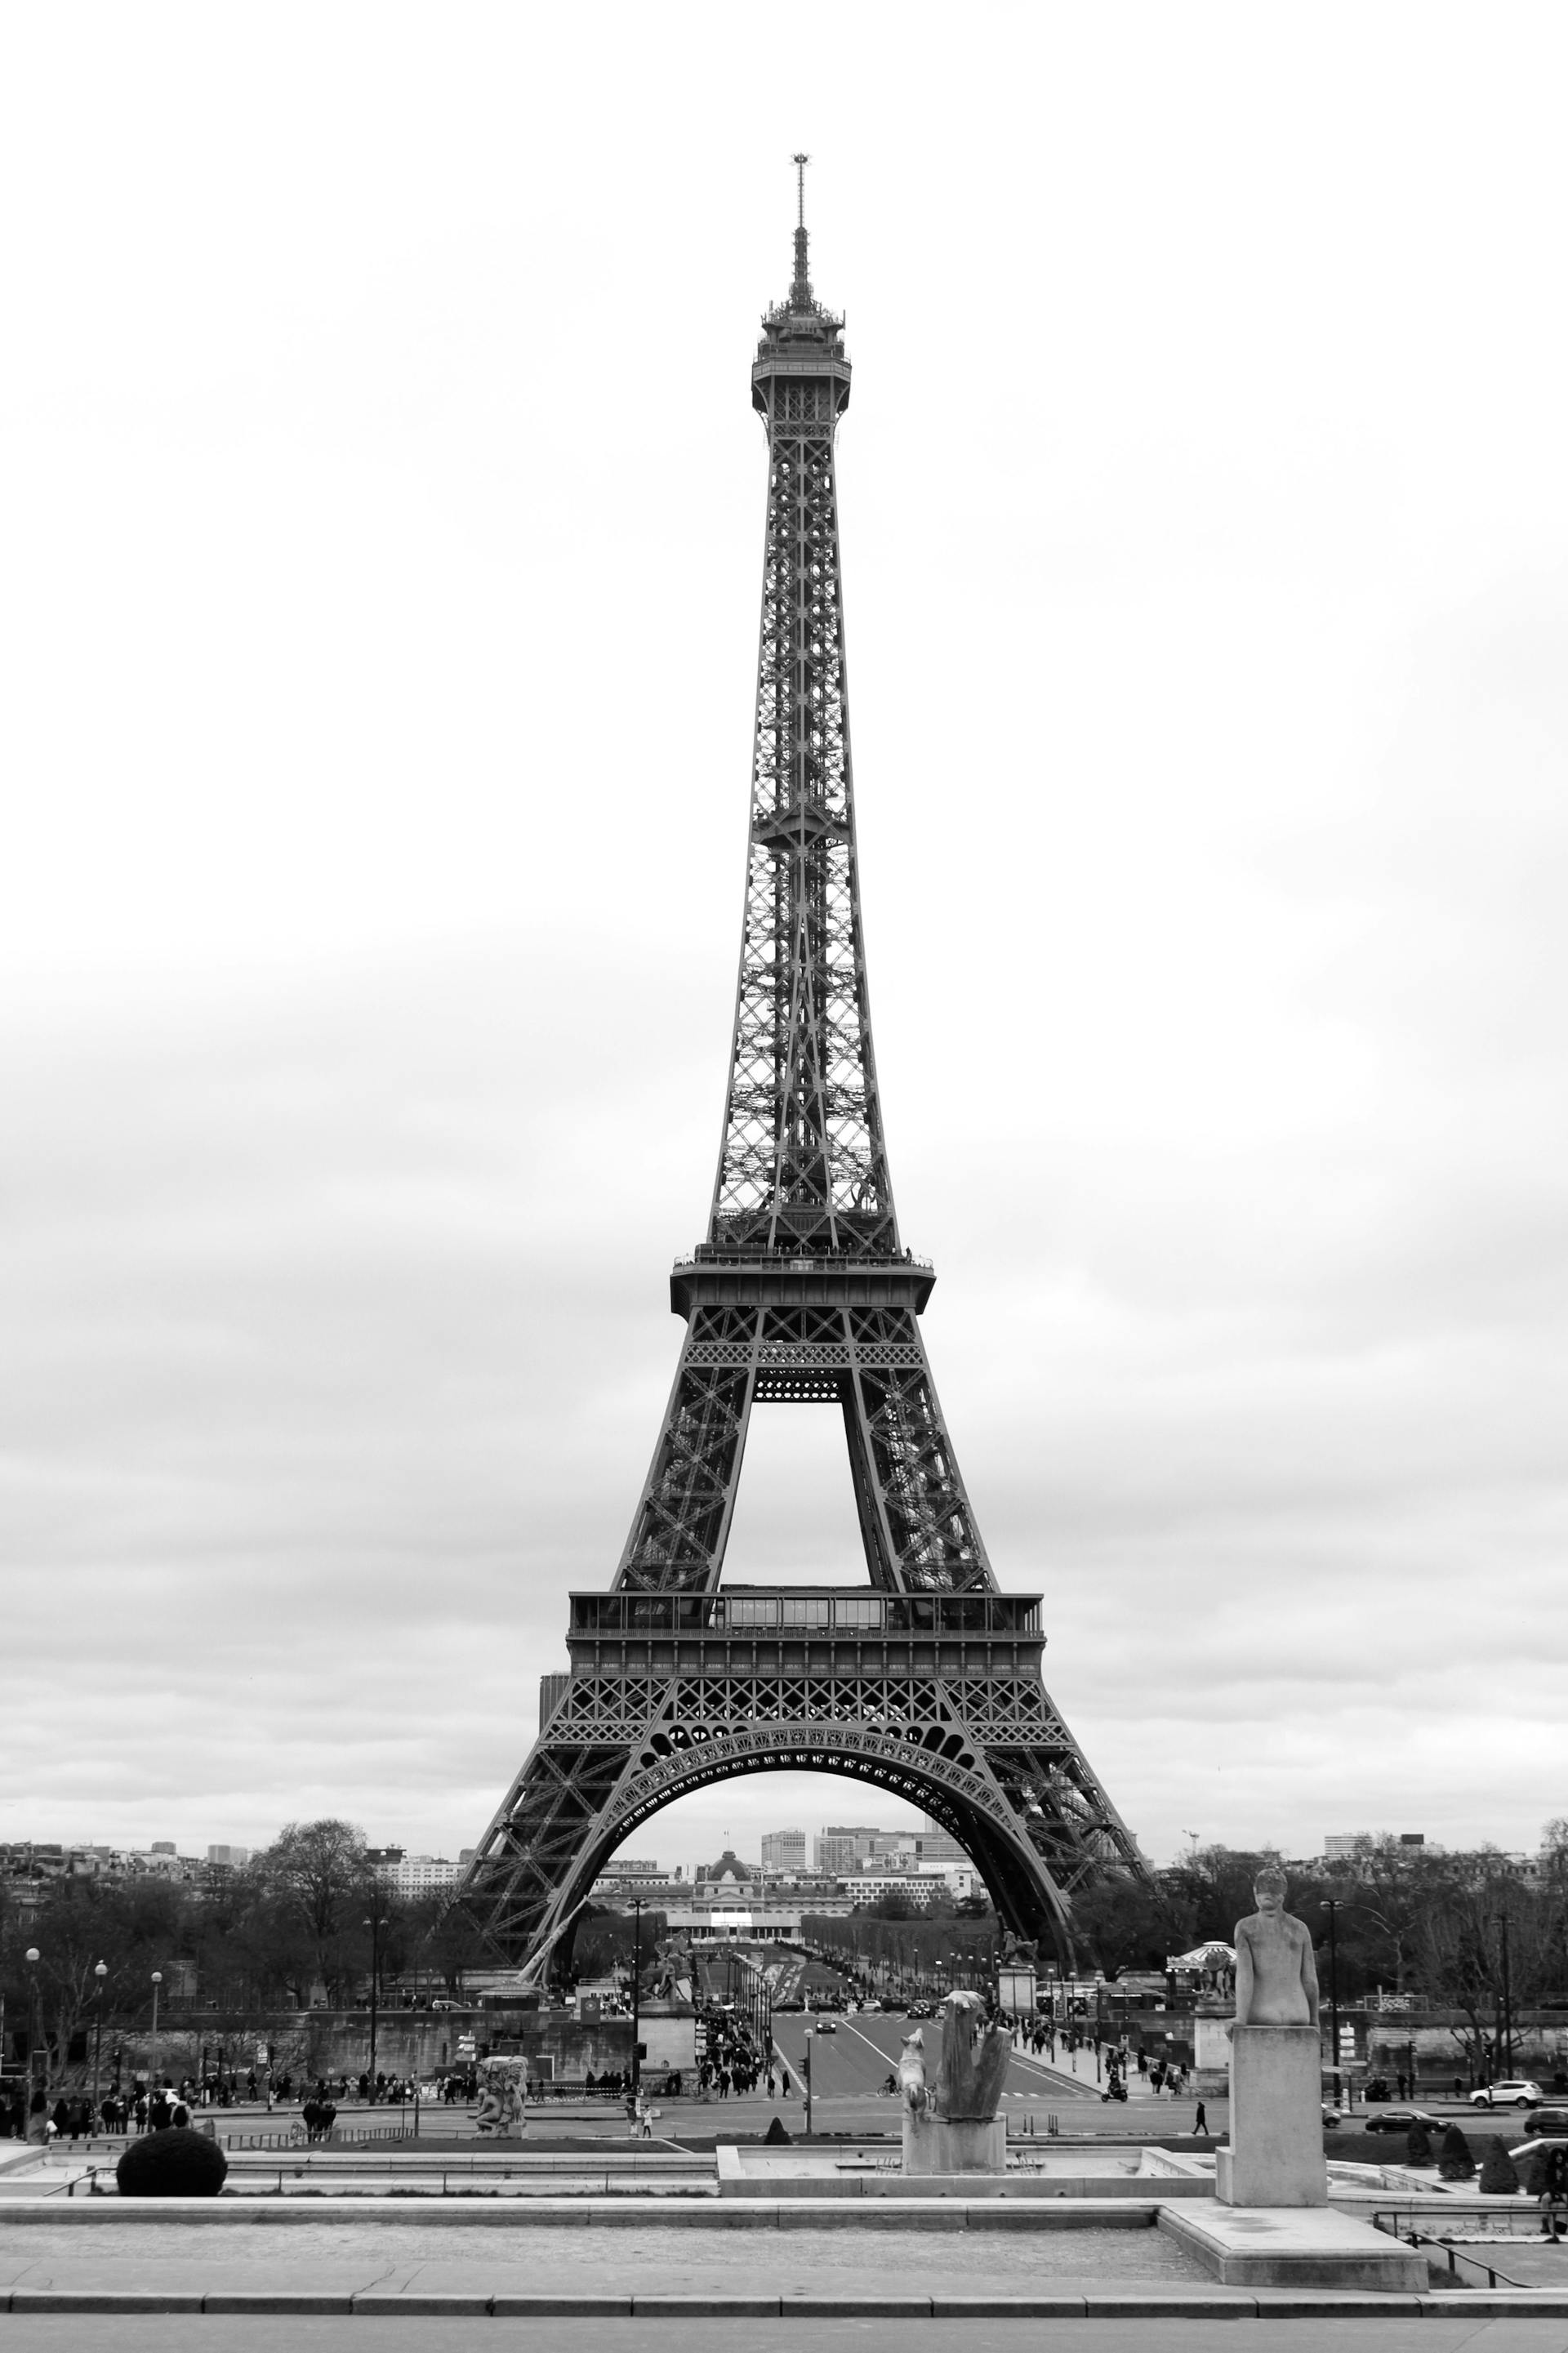 A grayscale photo of Eiffel Tower | Source: Pexels